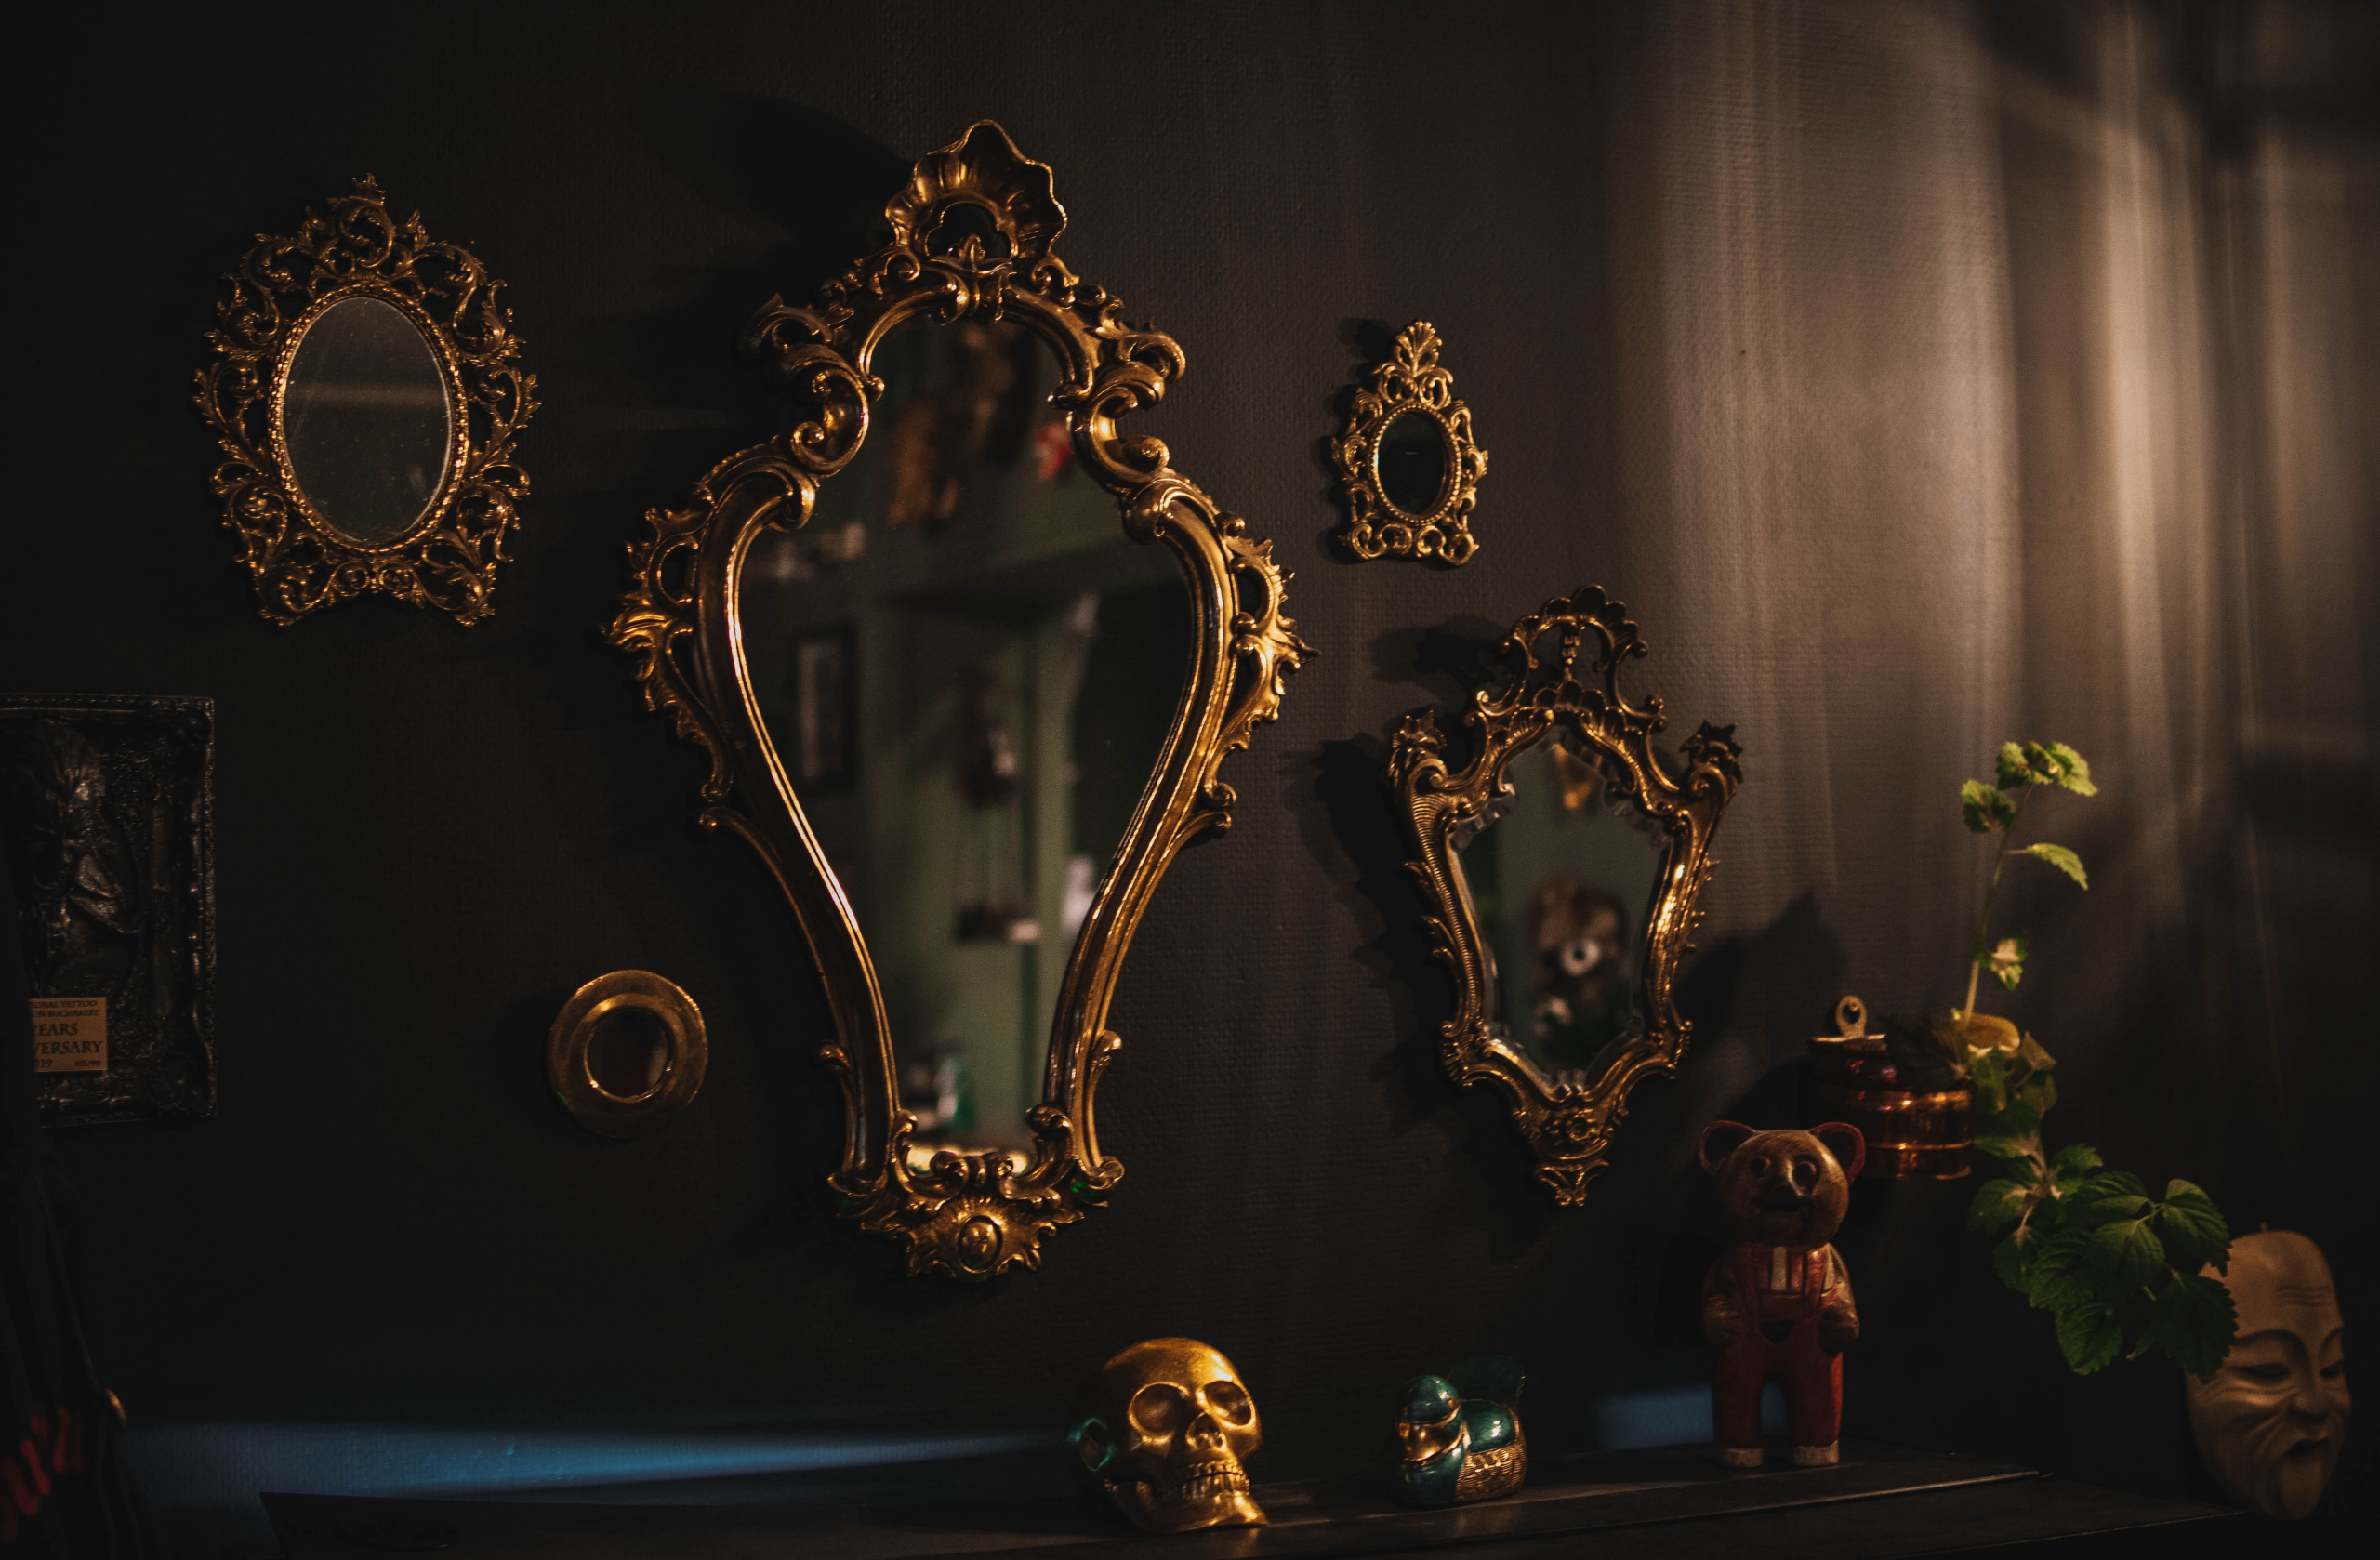 Ornate gold gilt mirrors on a wall surrounded by antique items